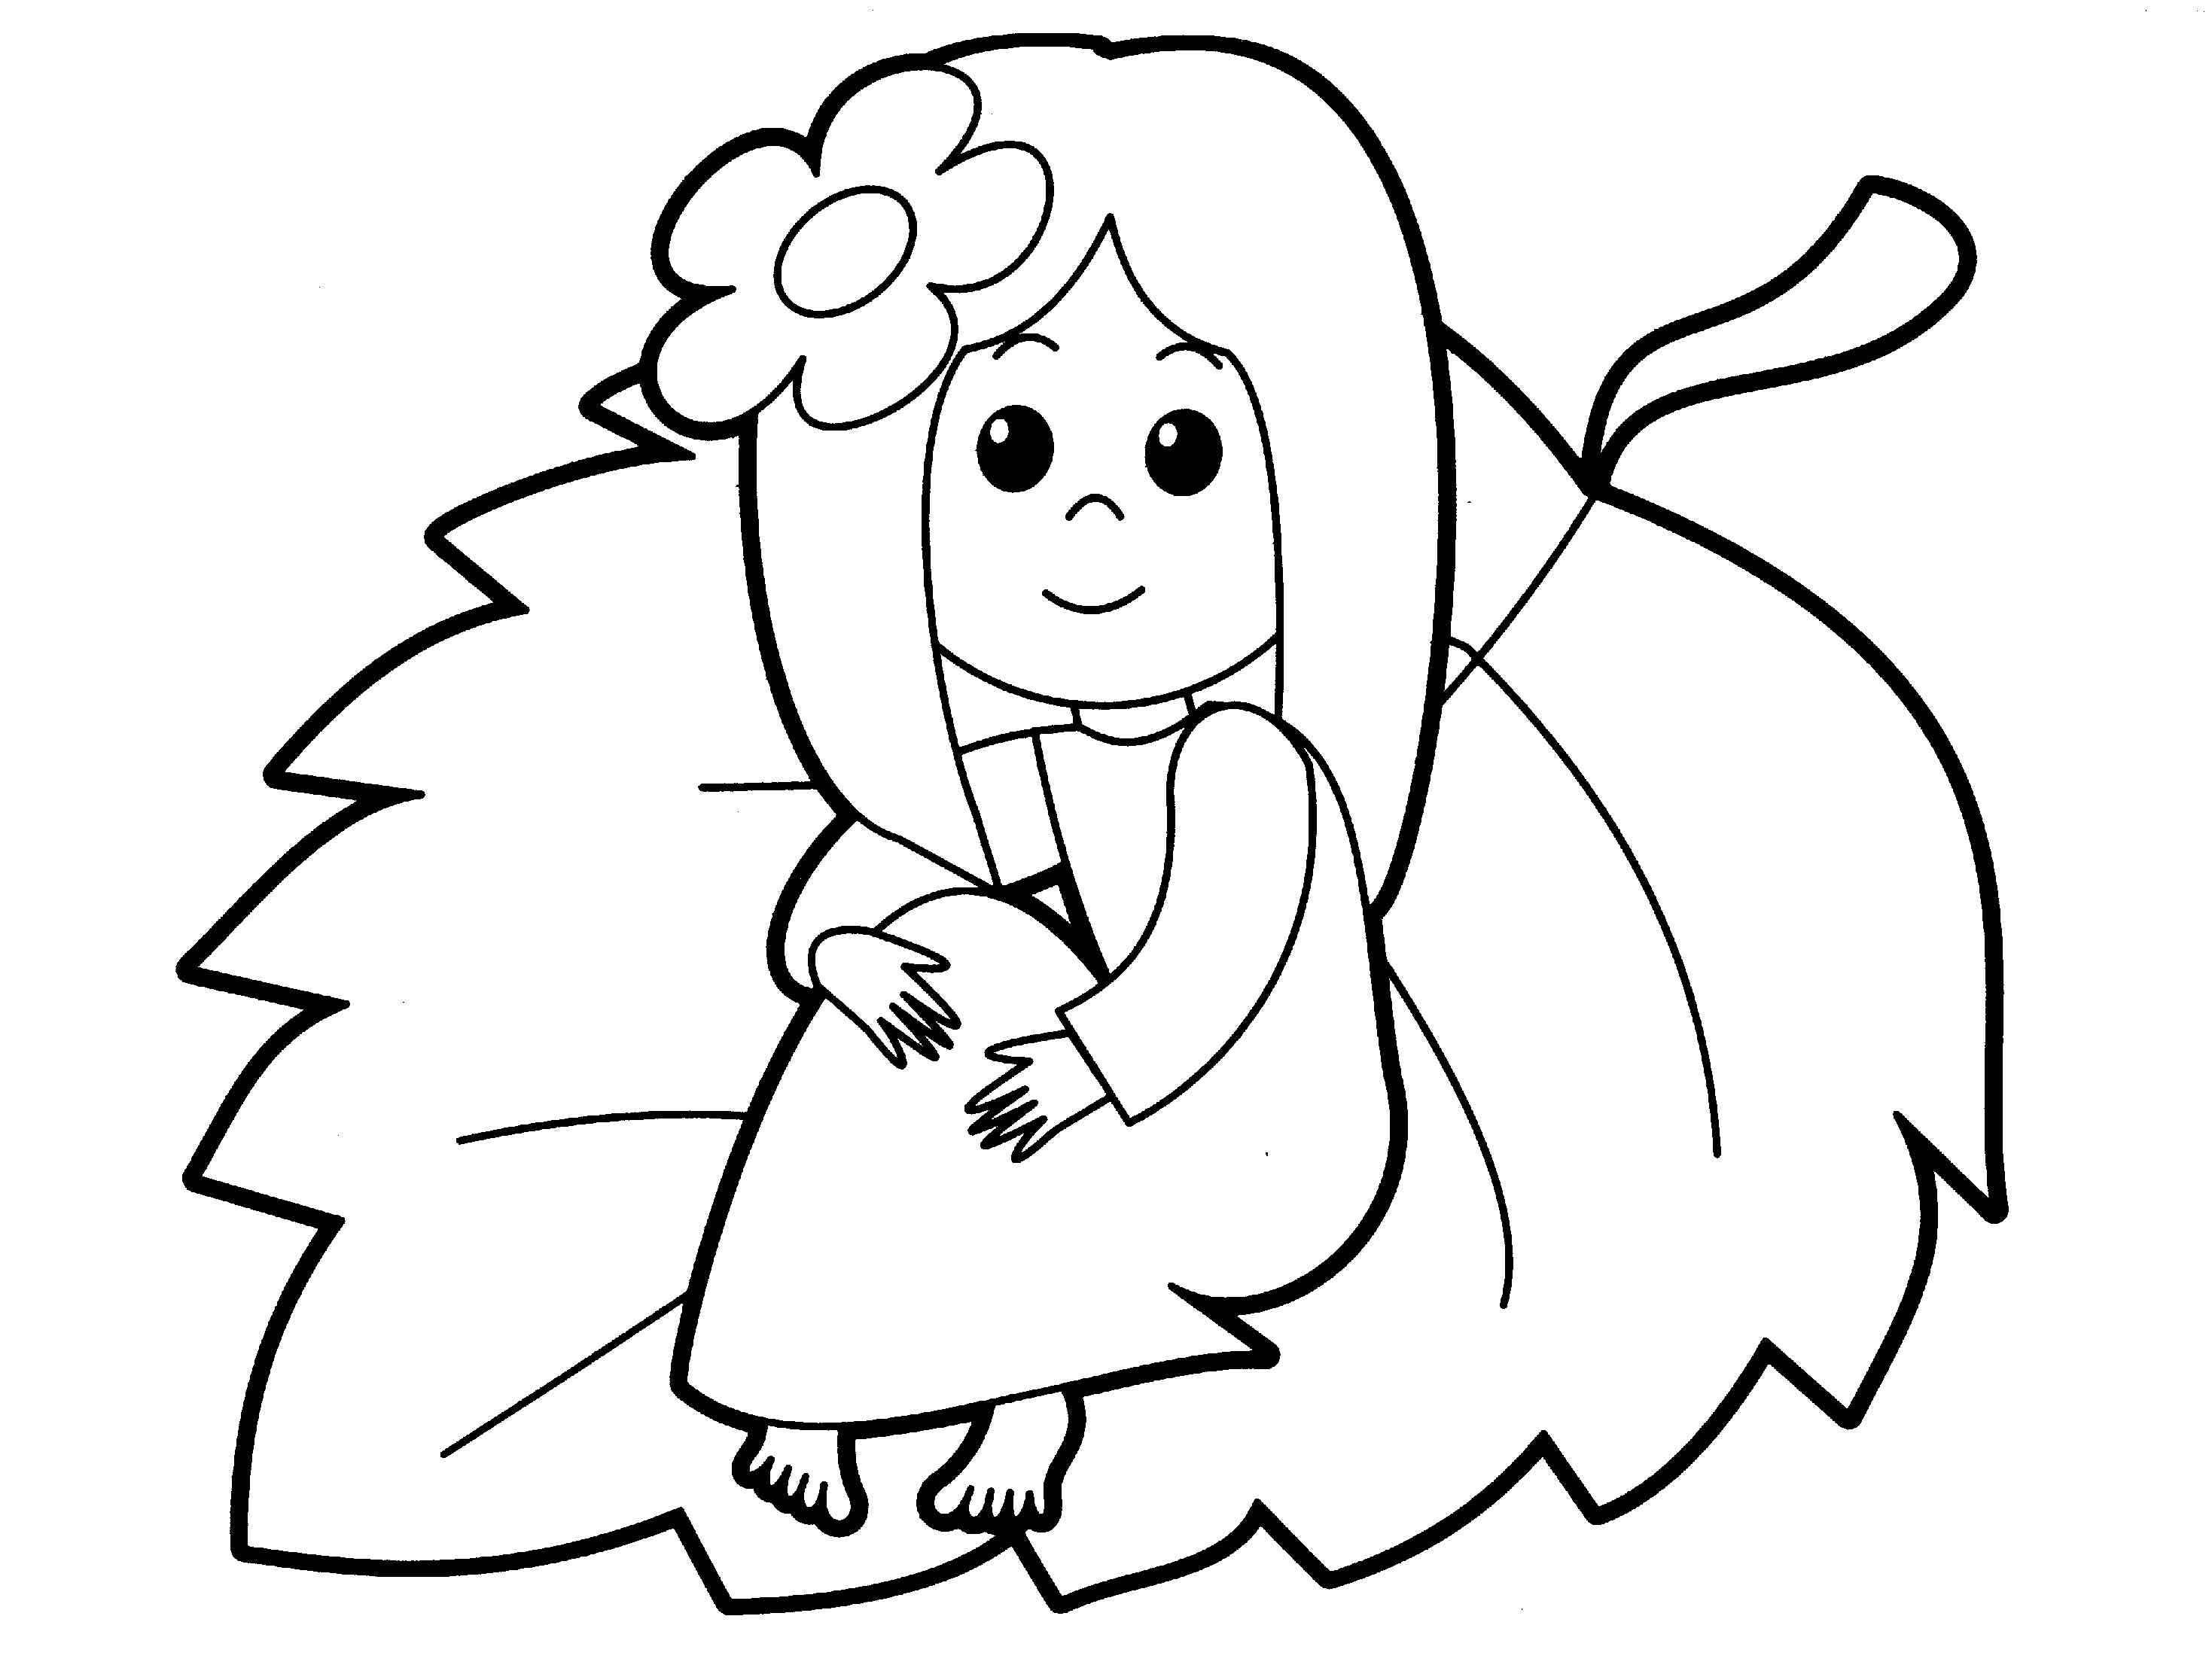 Coloring Pages For Girls 9 And Up
 Coloring Pages For Girls 9 And Up